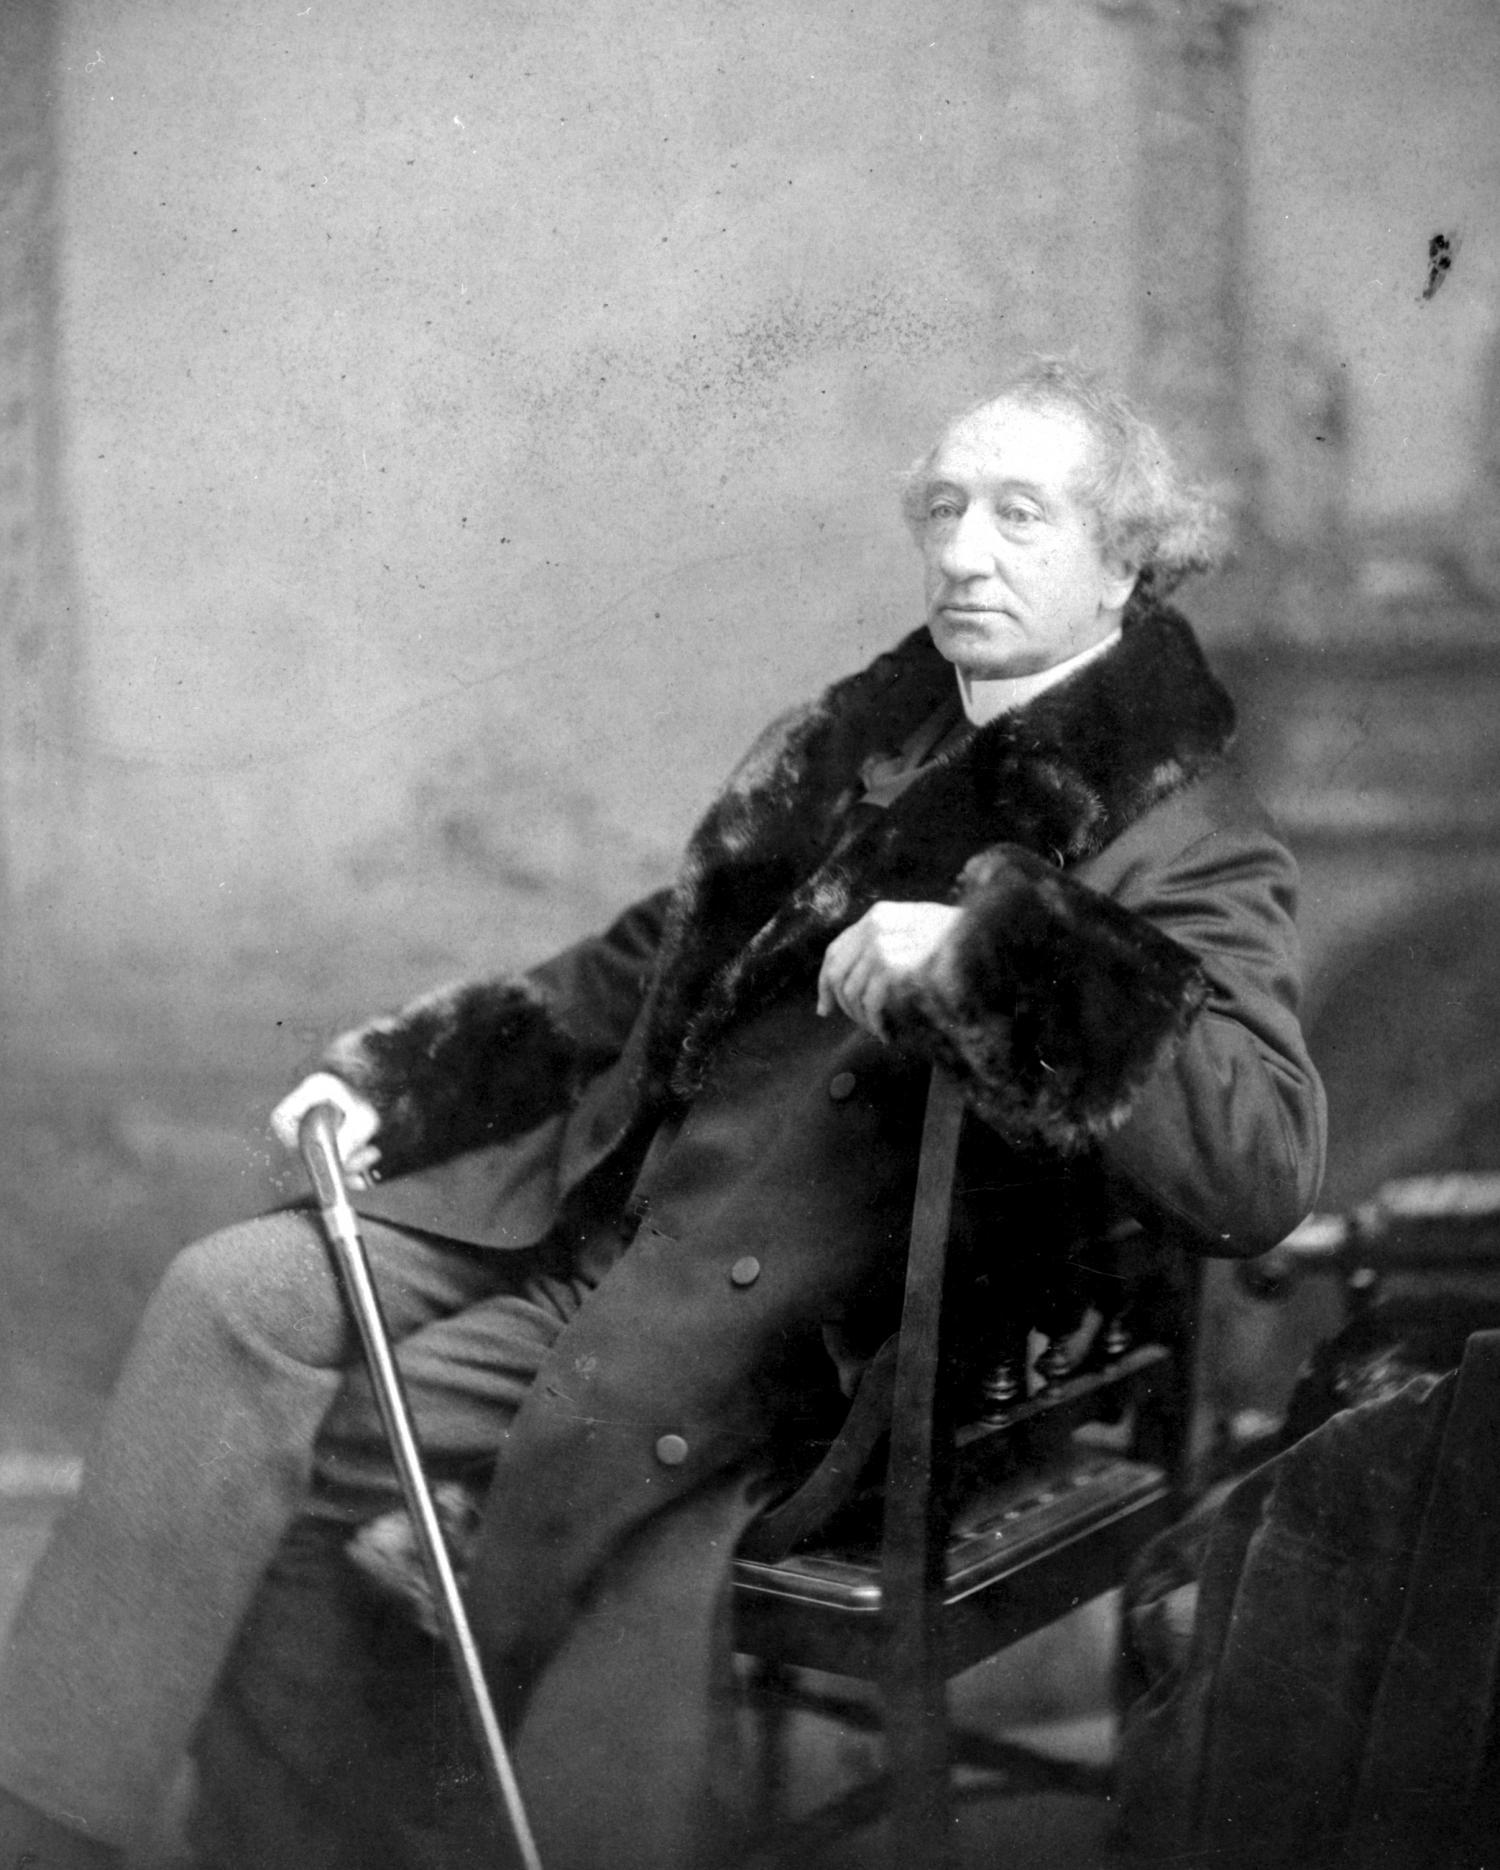 A portrait of Sir John A. Macdonald from around 1880.